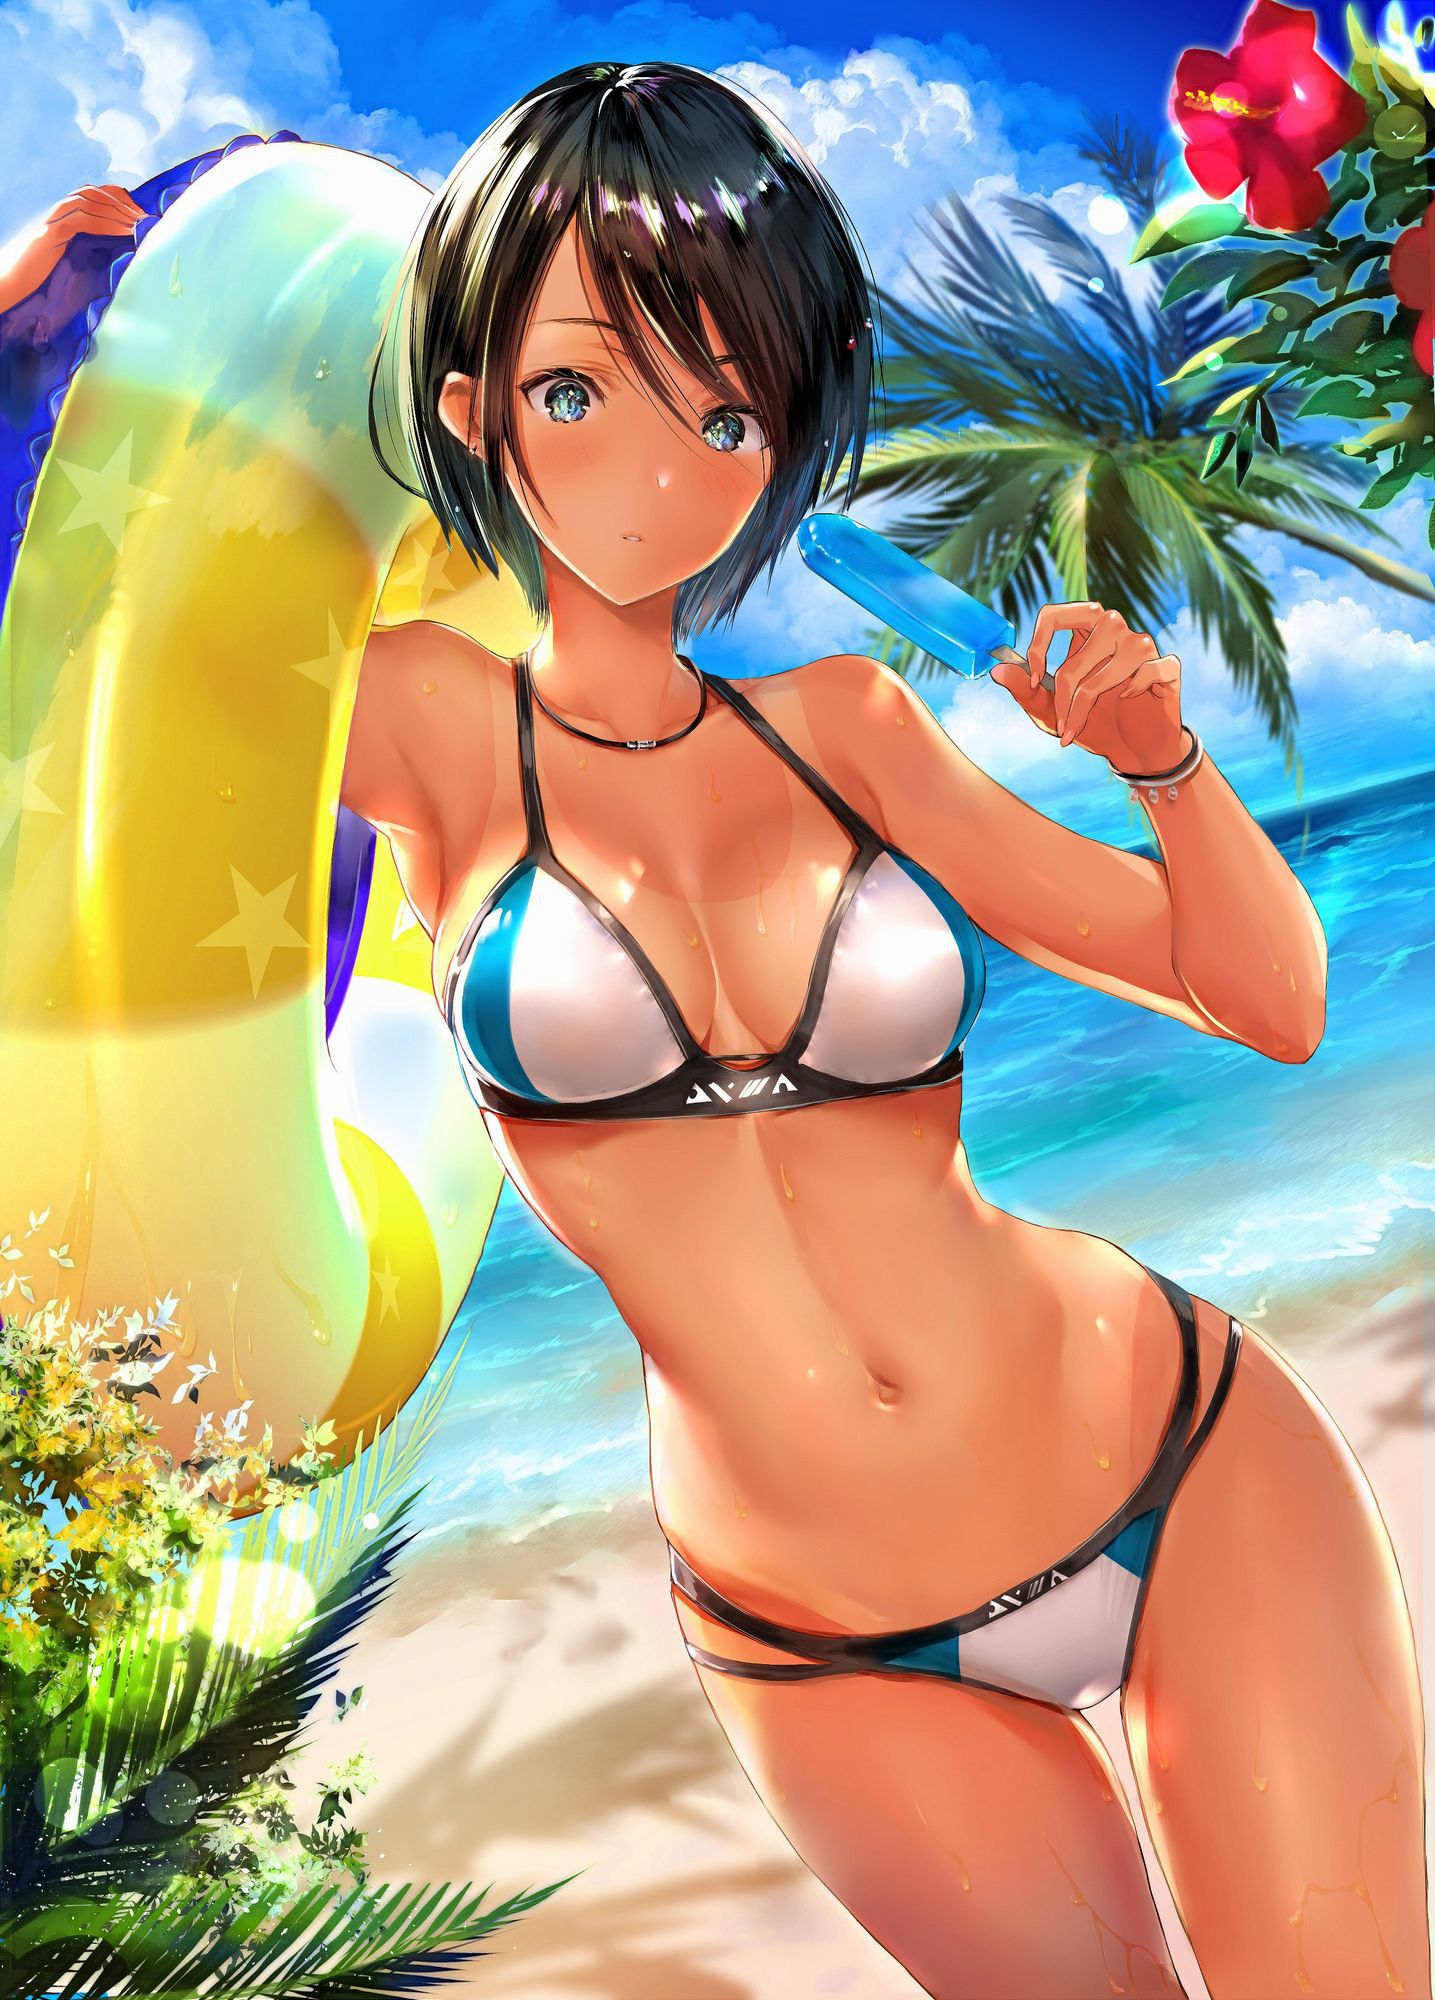 [2nd] secondary image of a cool girl wearing a swimsuit part 4 [non-erotic swimsuit] 28